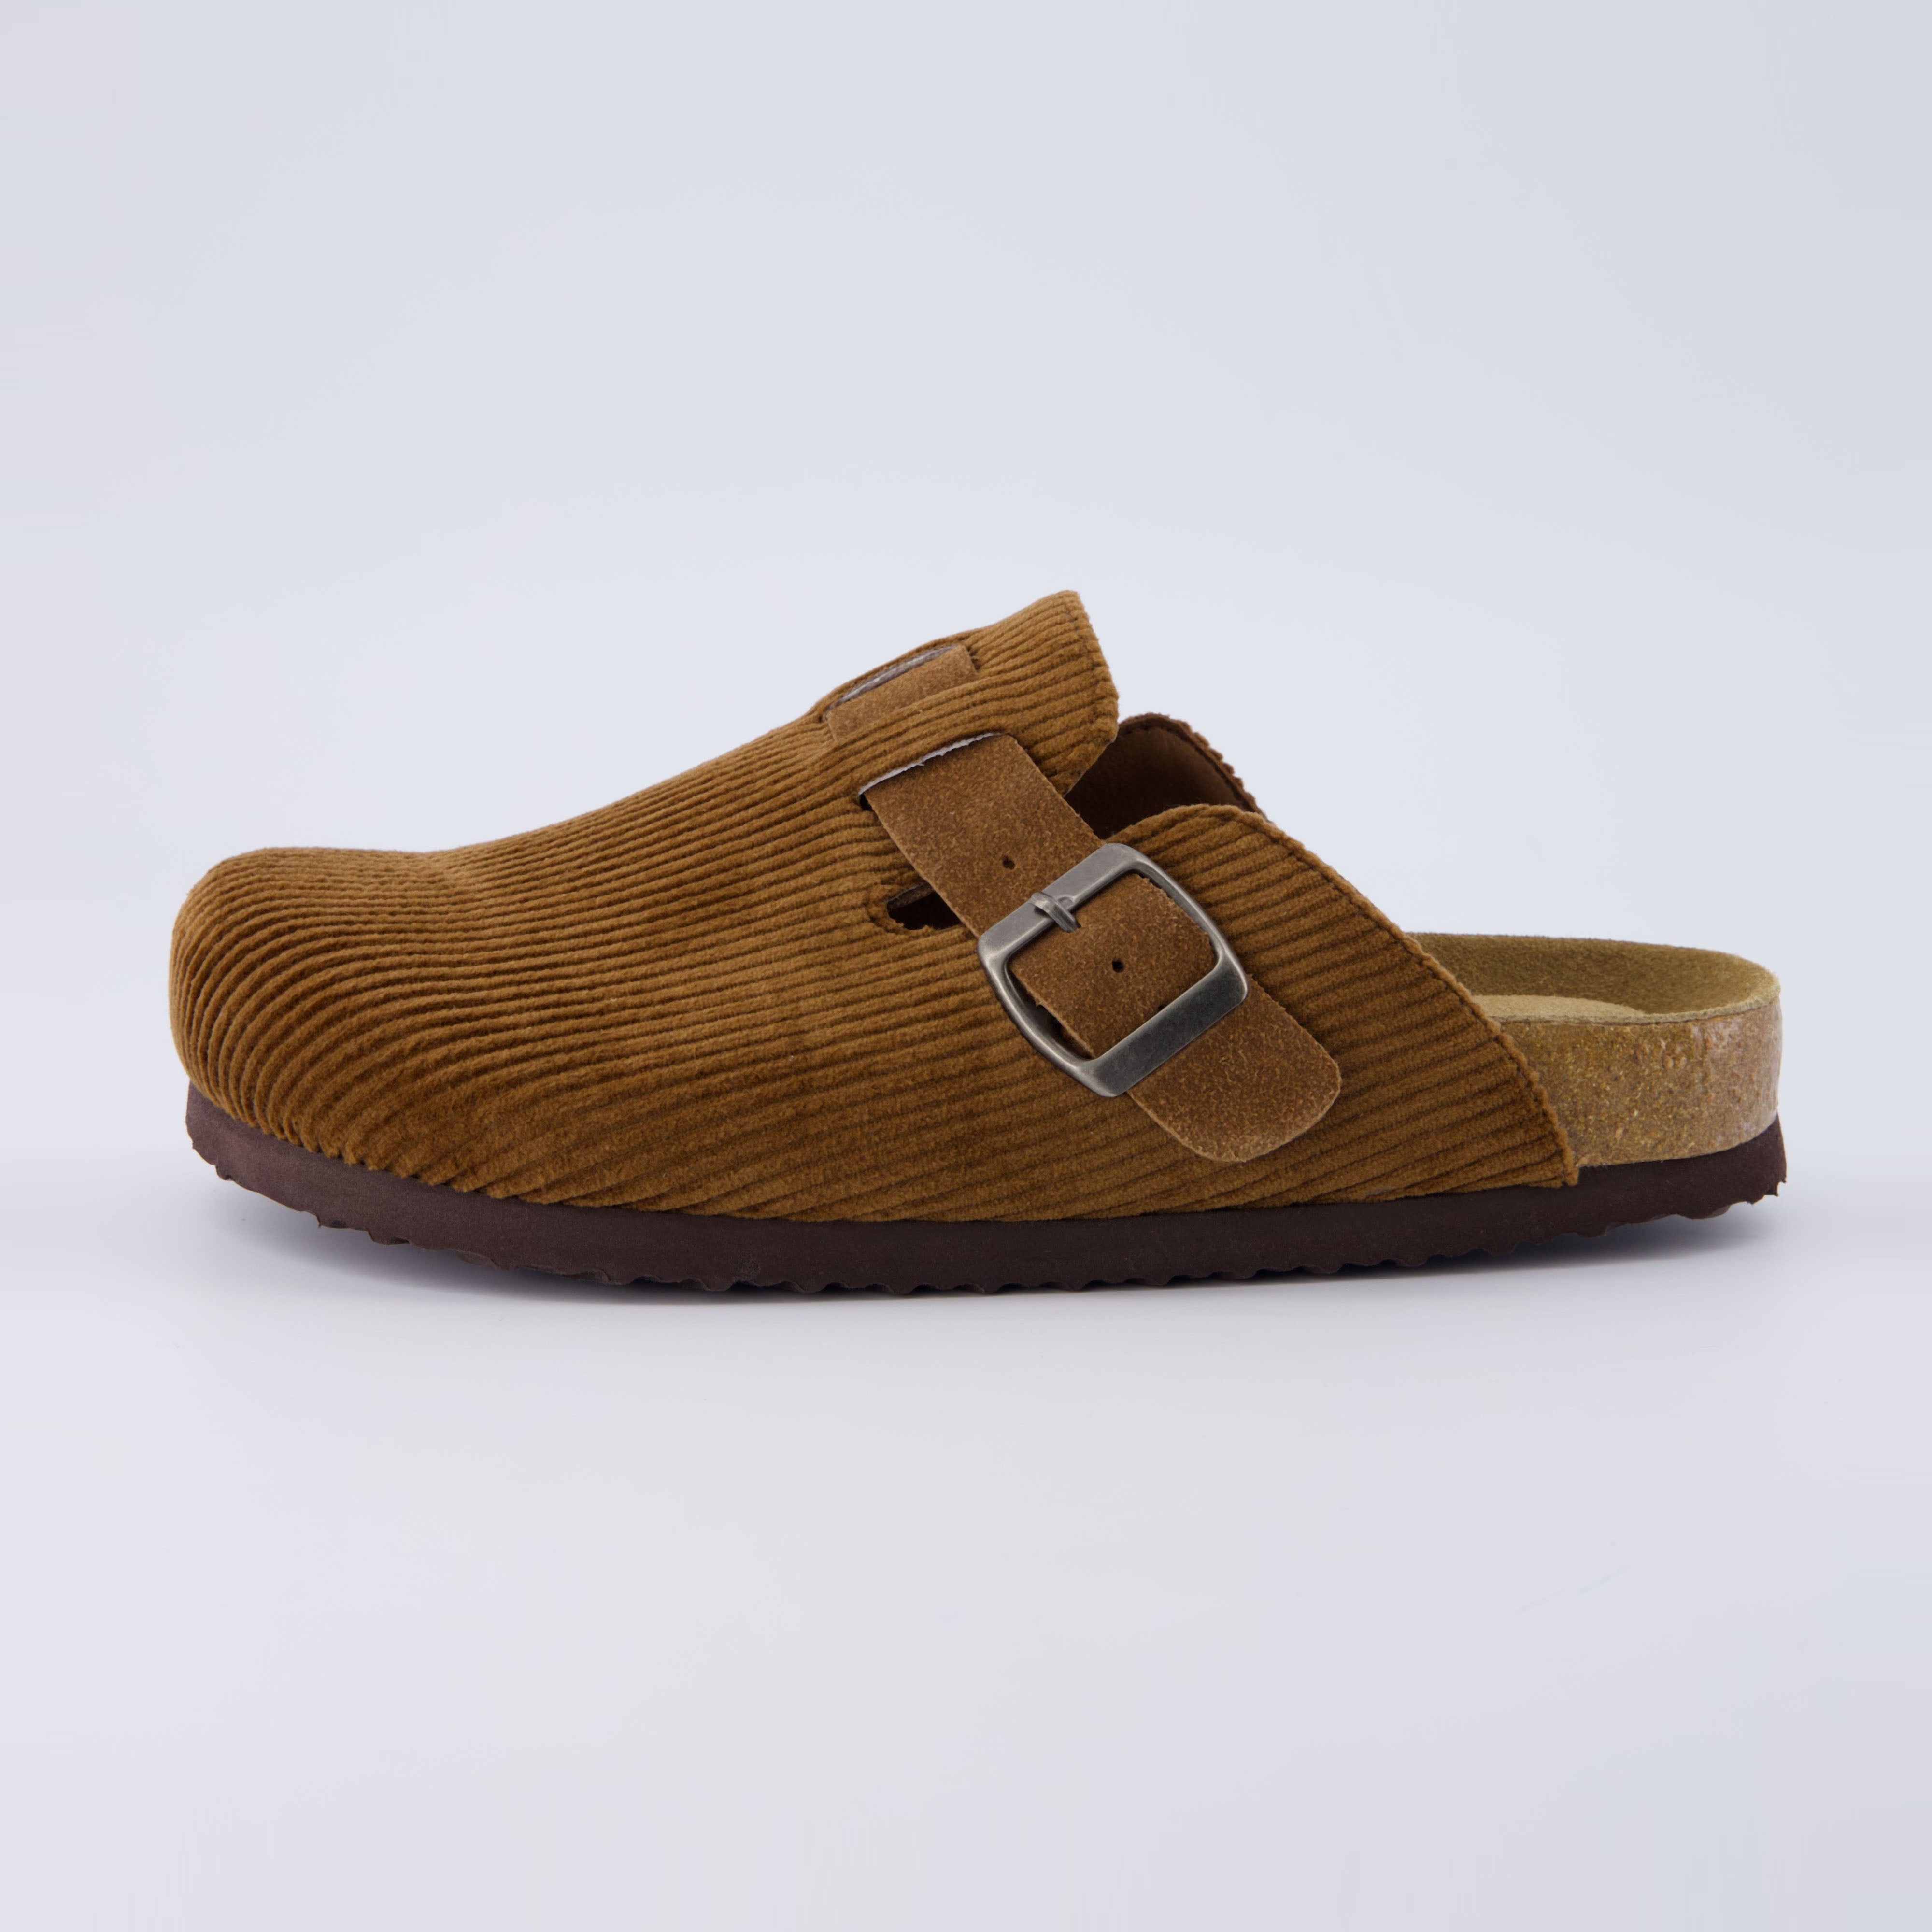 WTW Women's Cork Footbed Sandals - Cow Suede Slide India | Ubuy